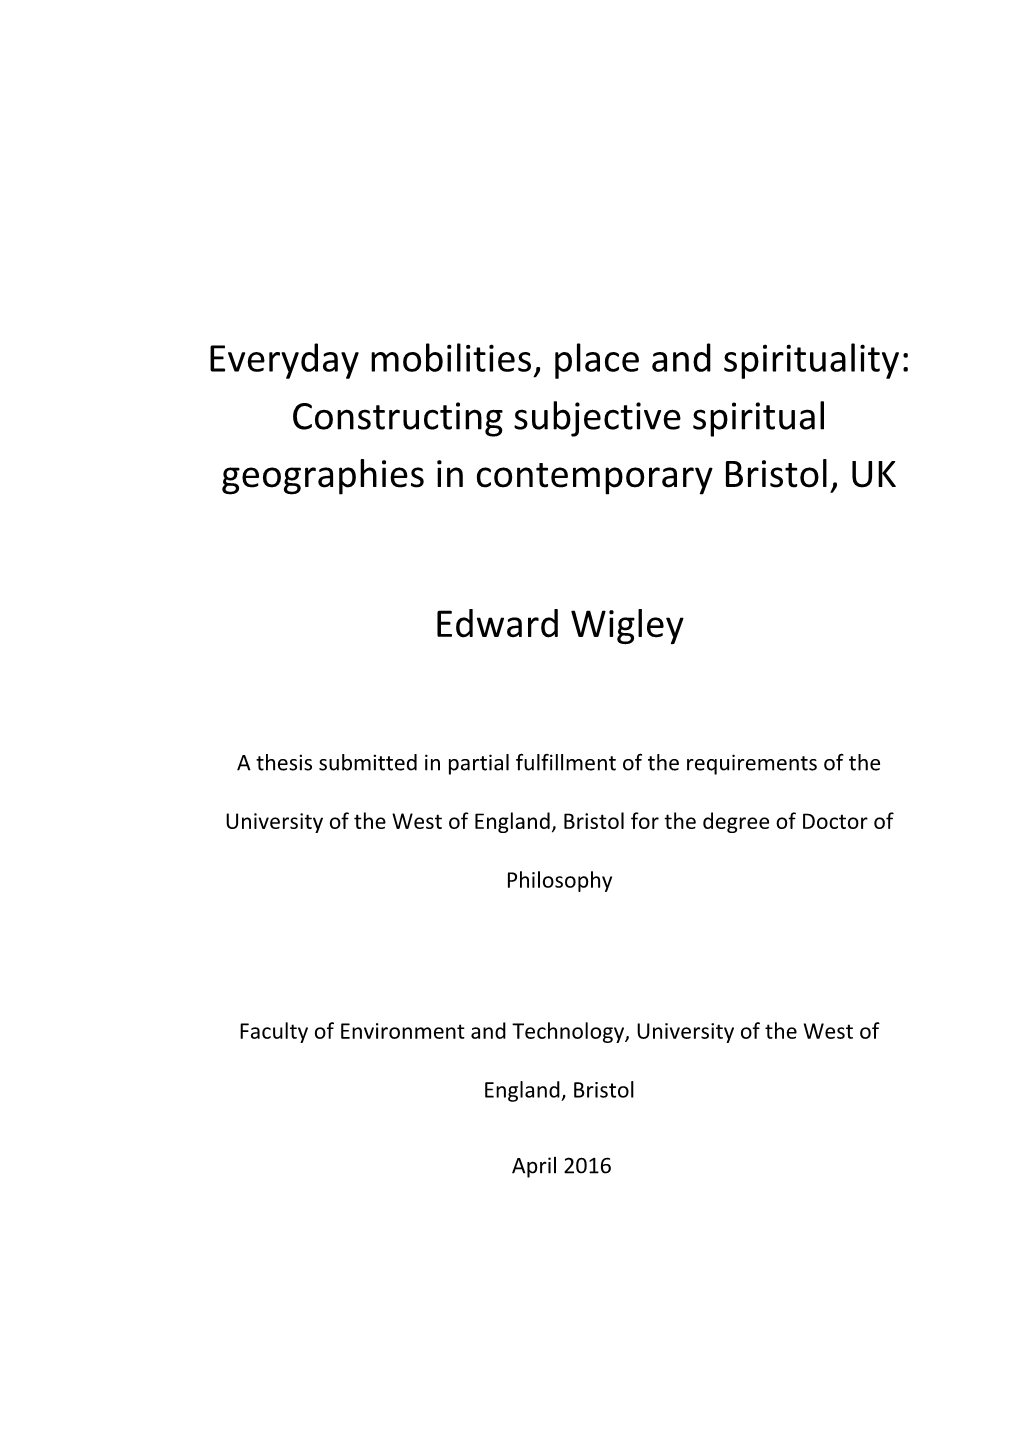 Constructing Subjective Spiritual Geographies in Contemporary Bristol, UK